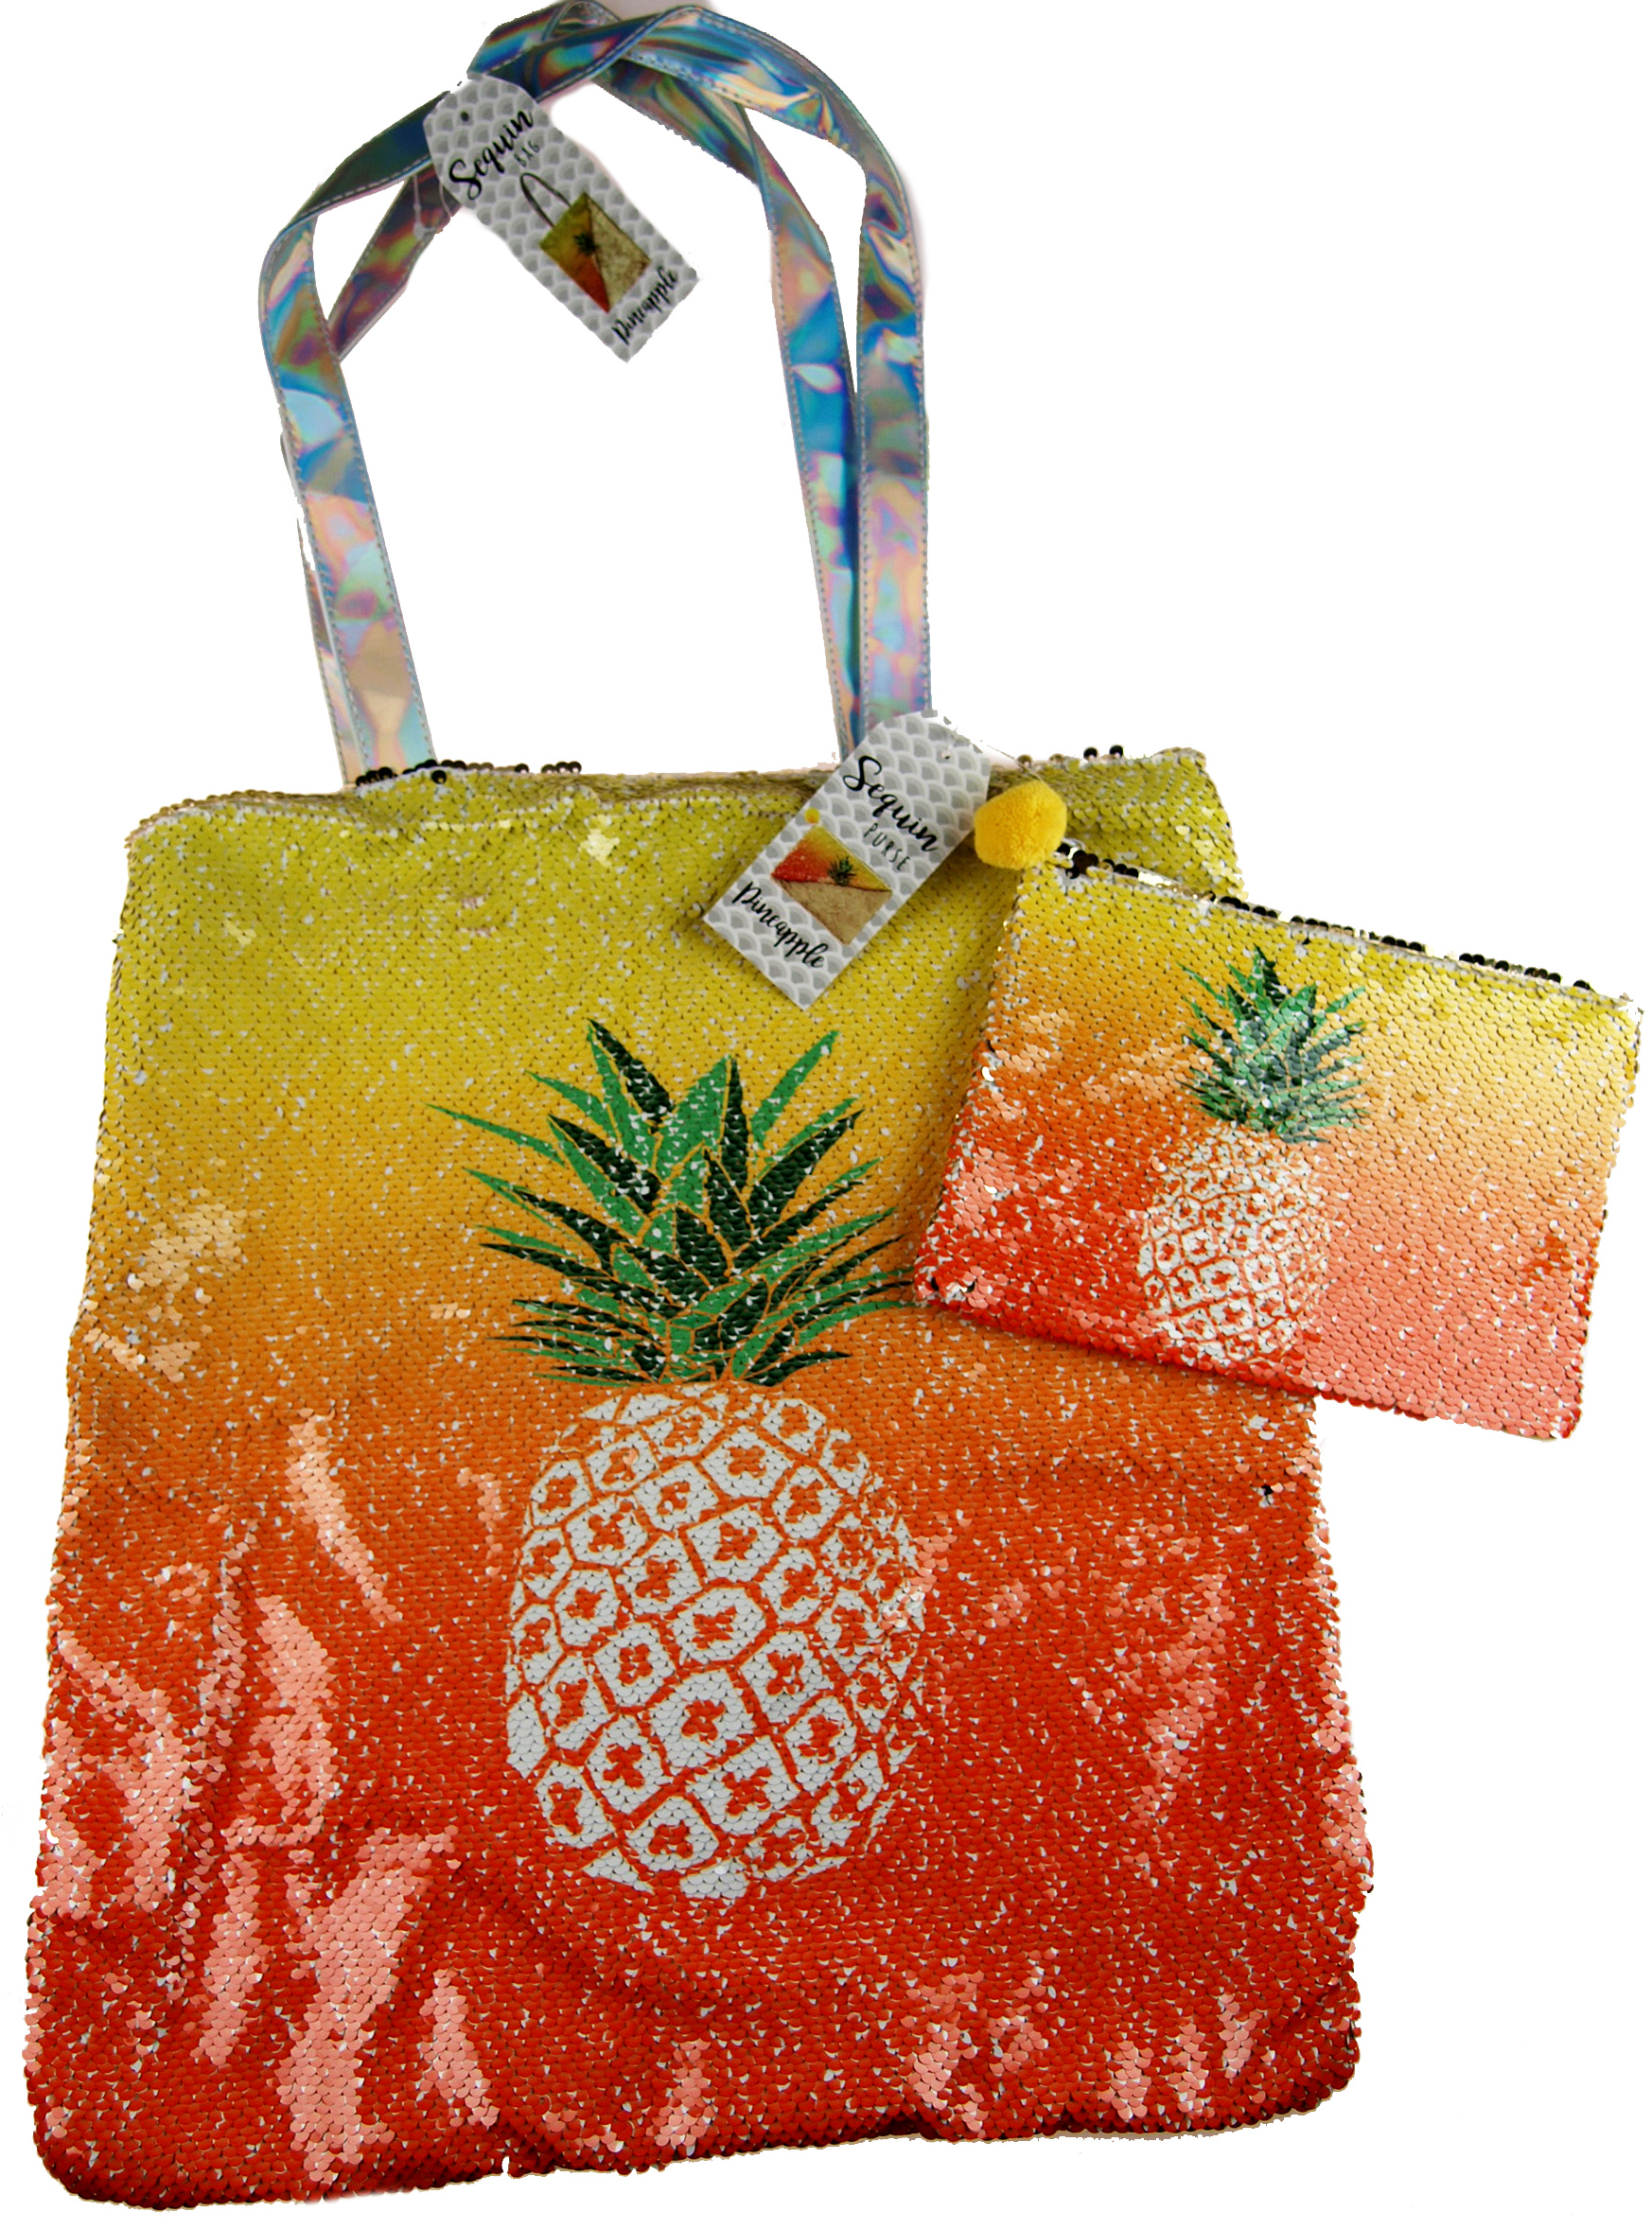 2 Piece Matching Reversible Sequin Pineapple Bag And Purse.